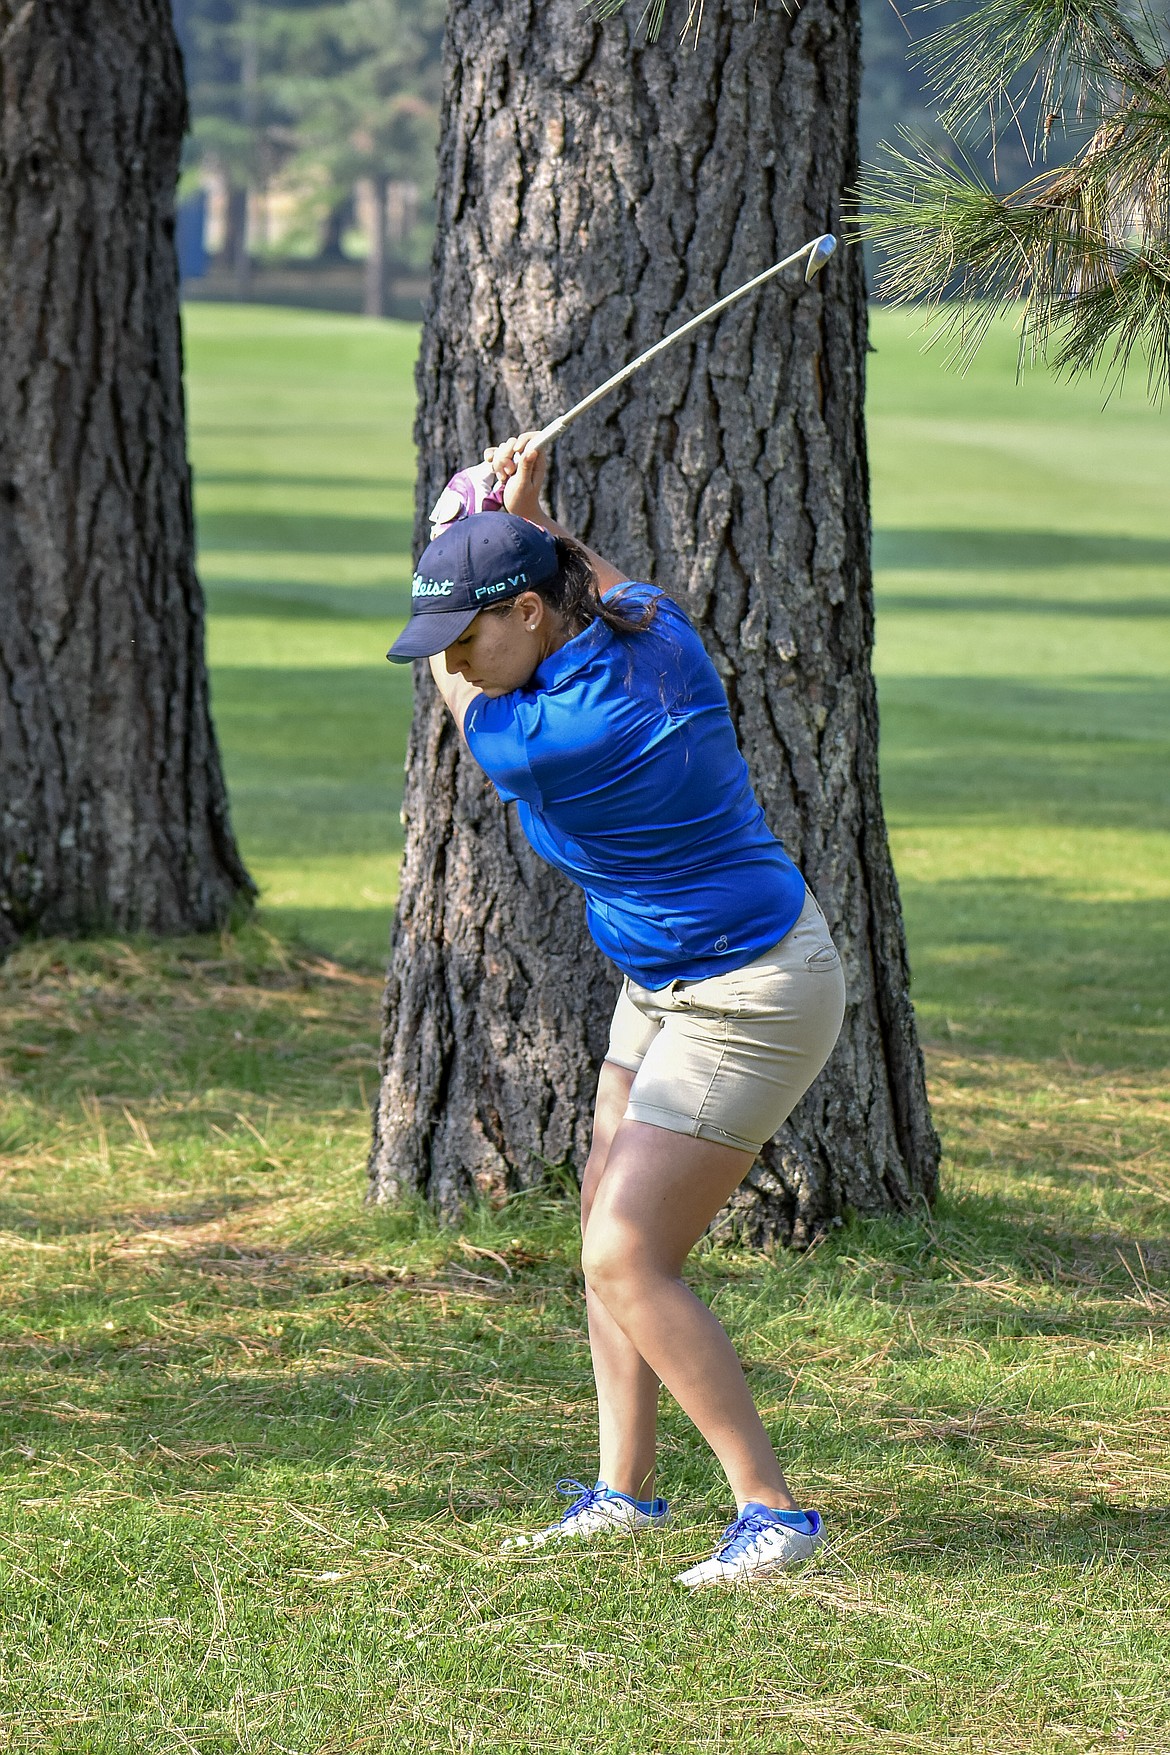 Libby senior Sammee Bradeen drives on the fourth hole at Cabinet View Friday. (Ben Kibbey/The Western News)